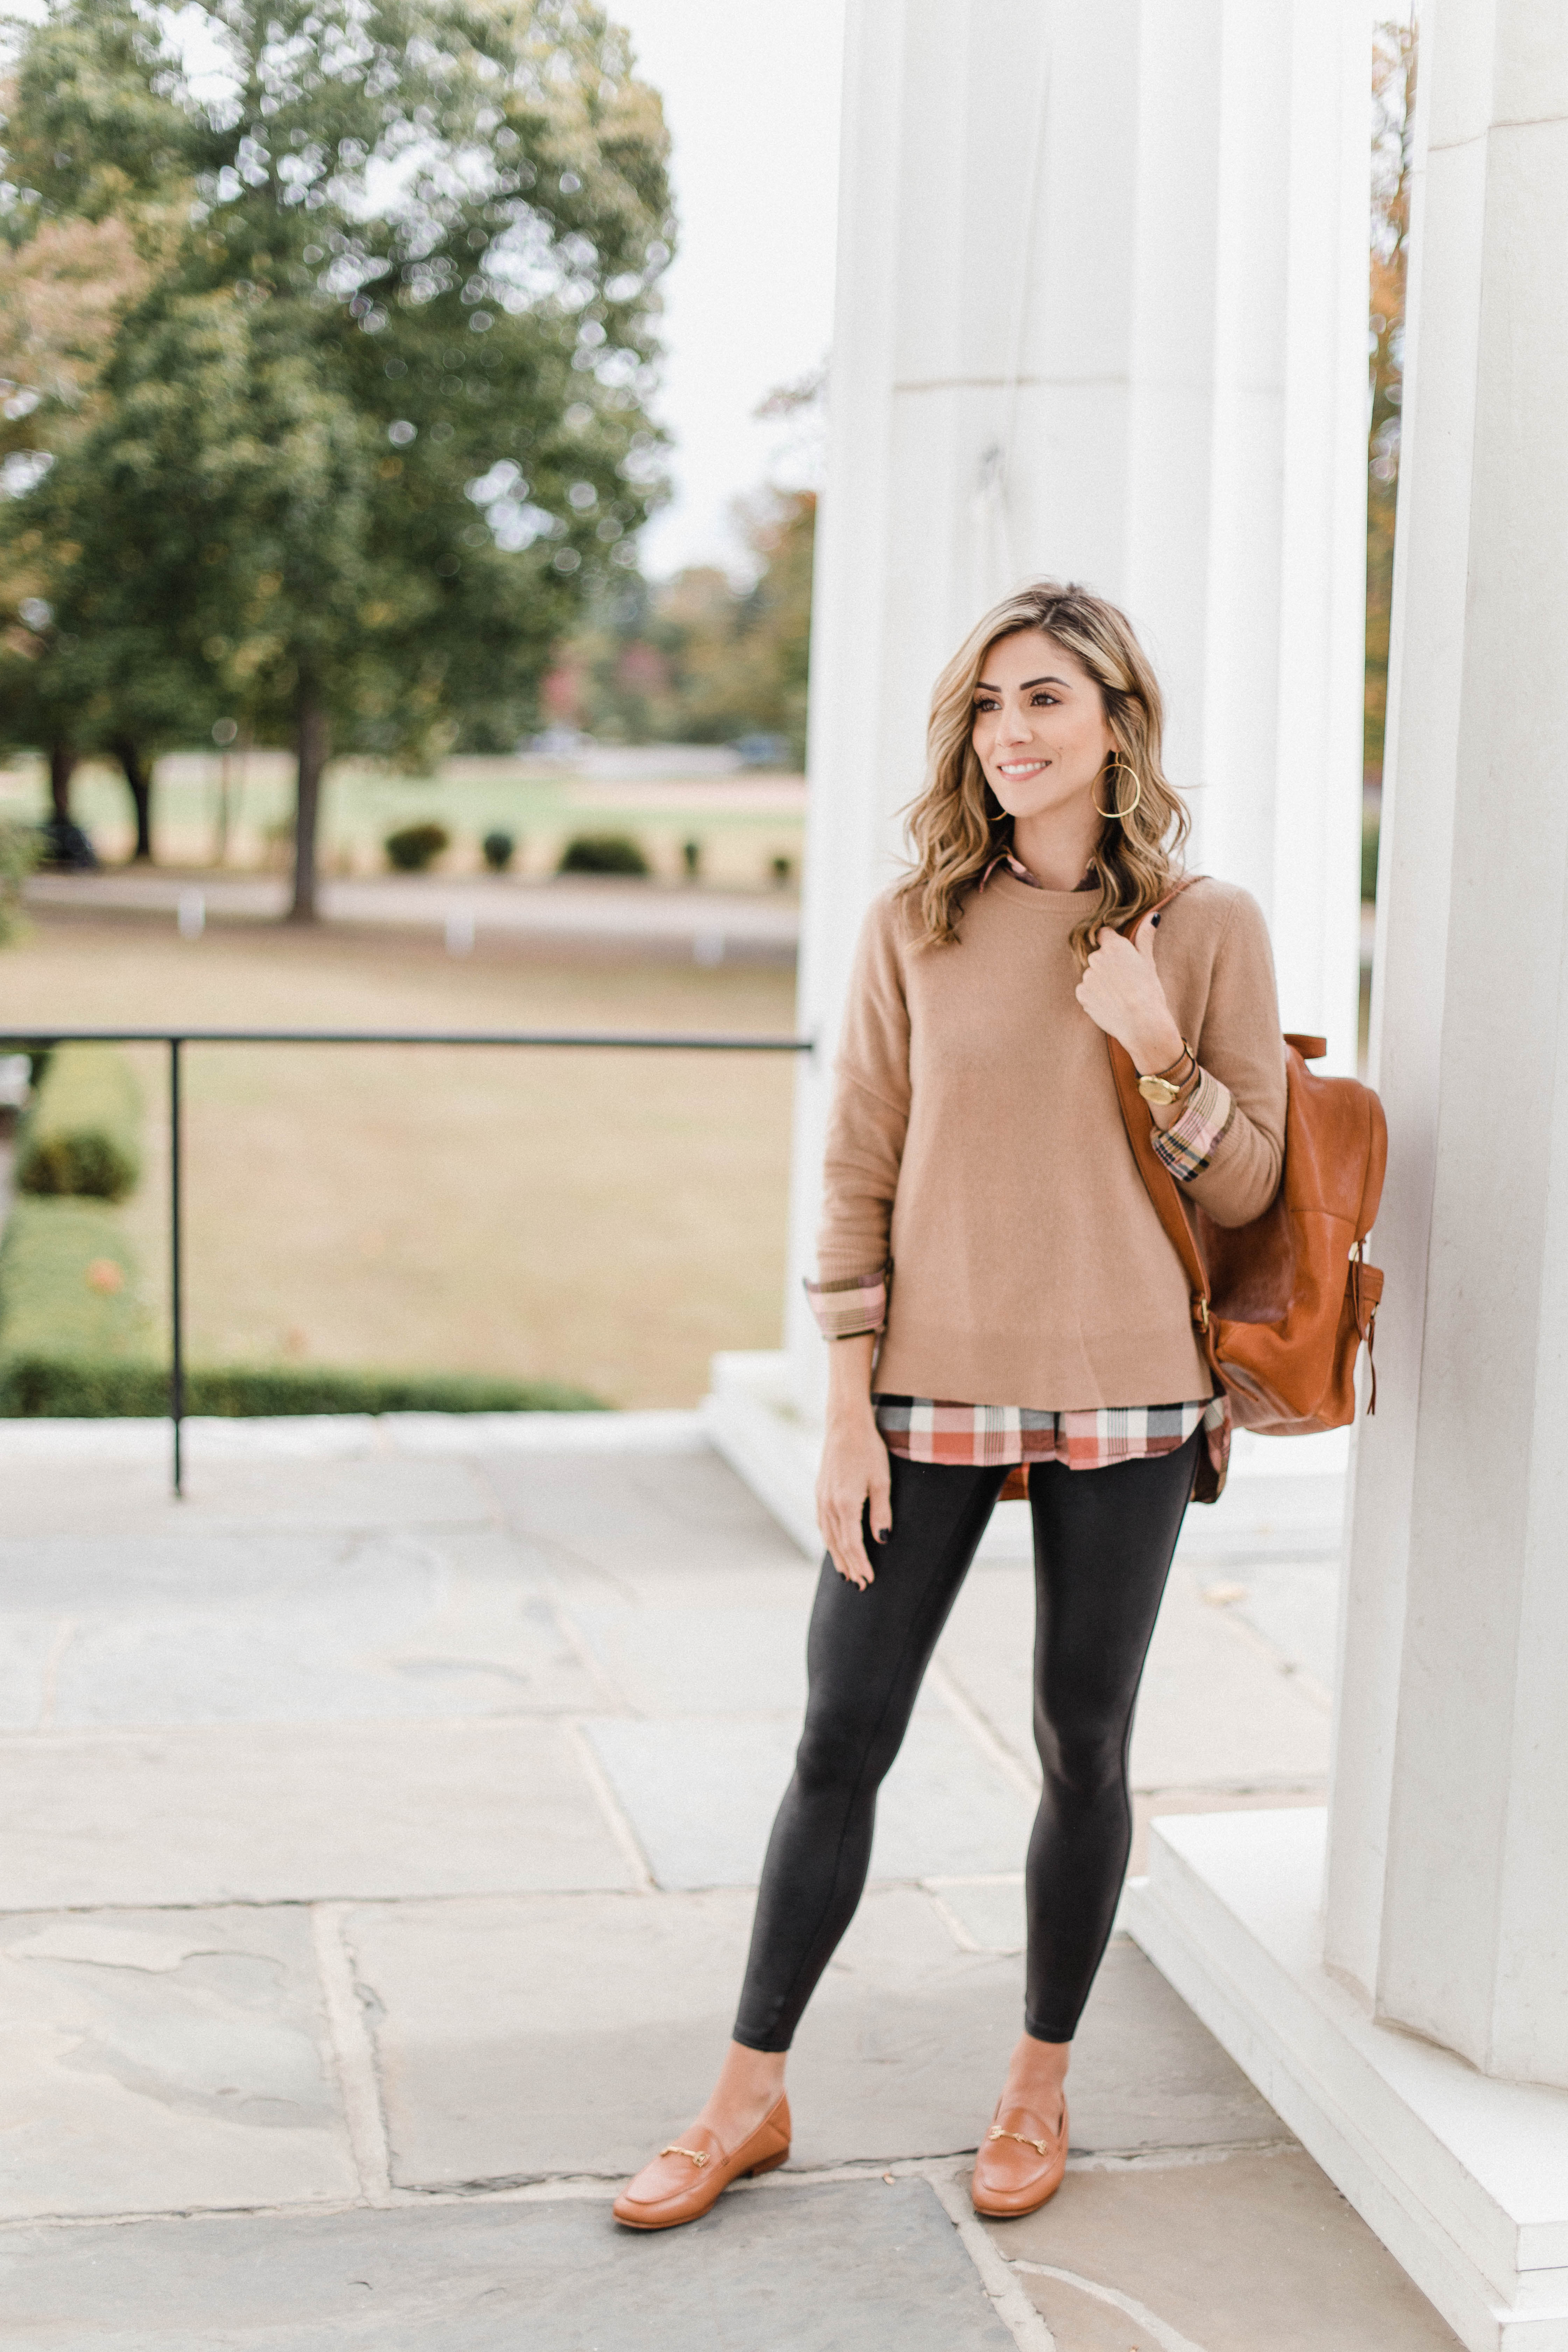 Connecticut life and style blogger Lauren McBride shares her ShopBop Fall Event picks, including classic wardrobe staples.